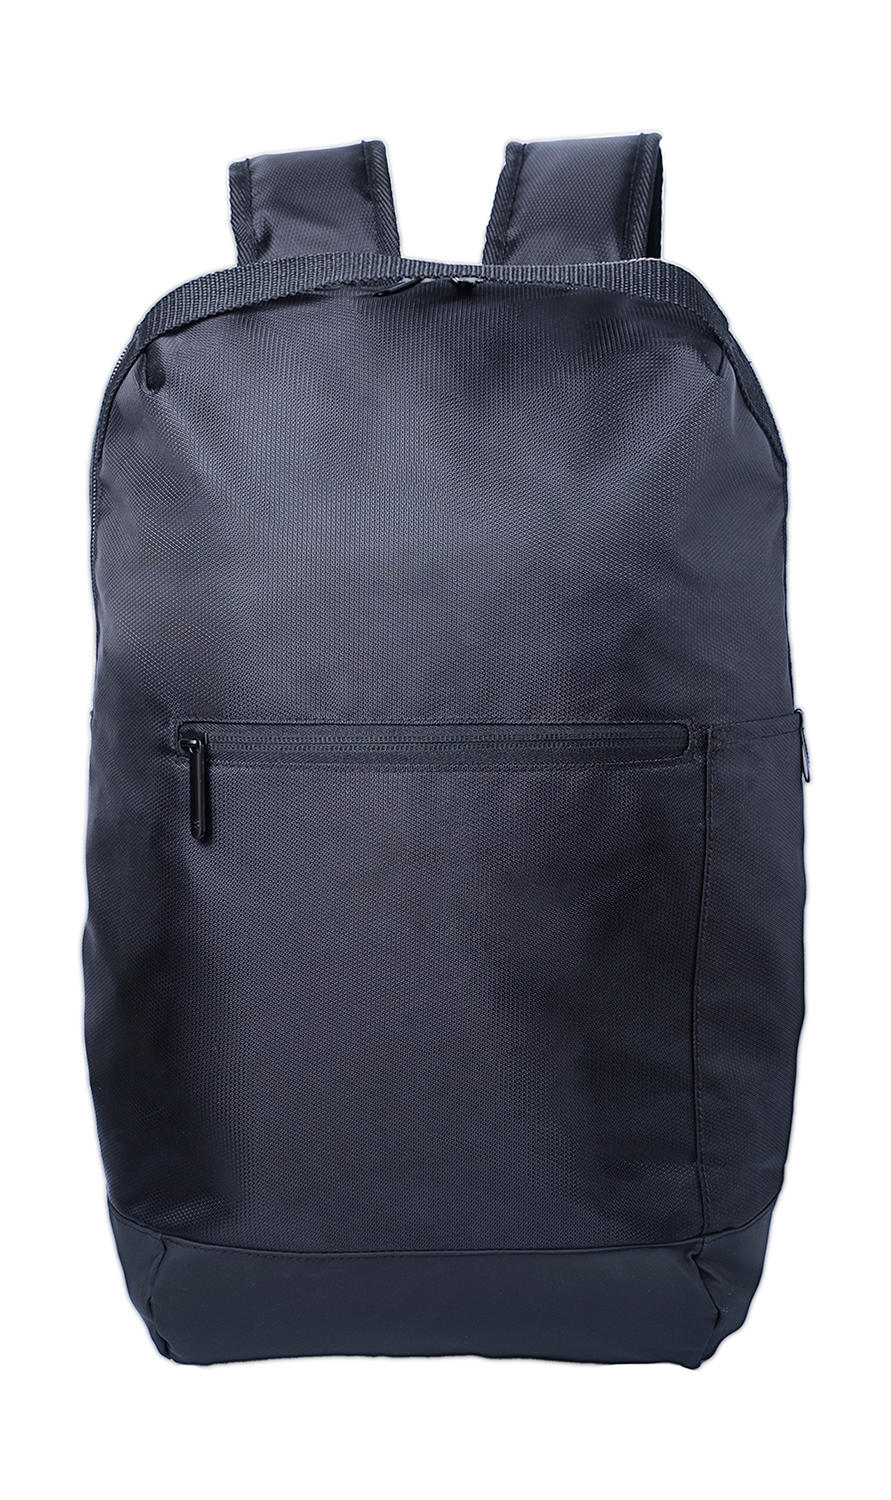 Nelson Daily Backpack